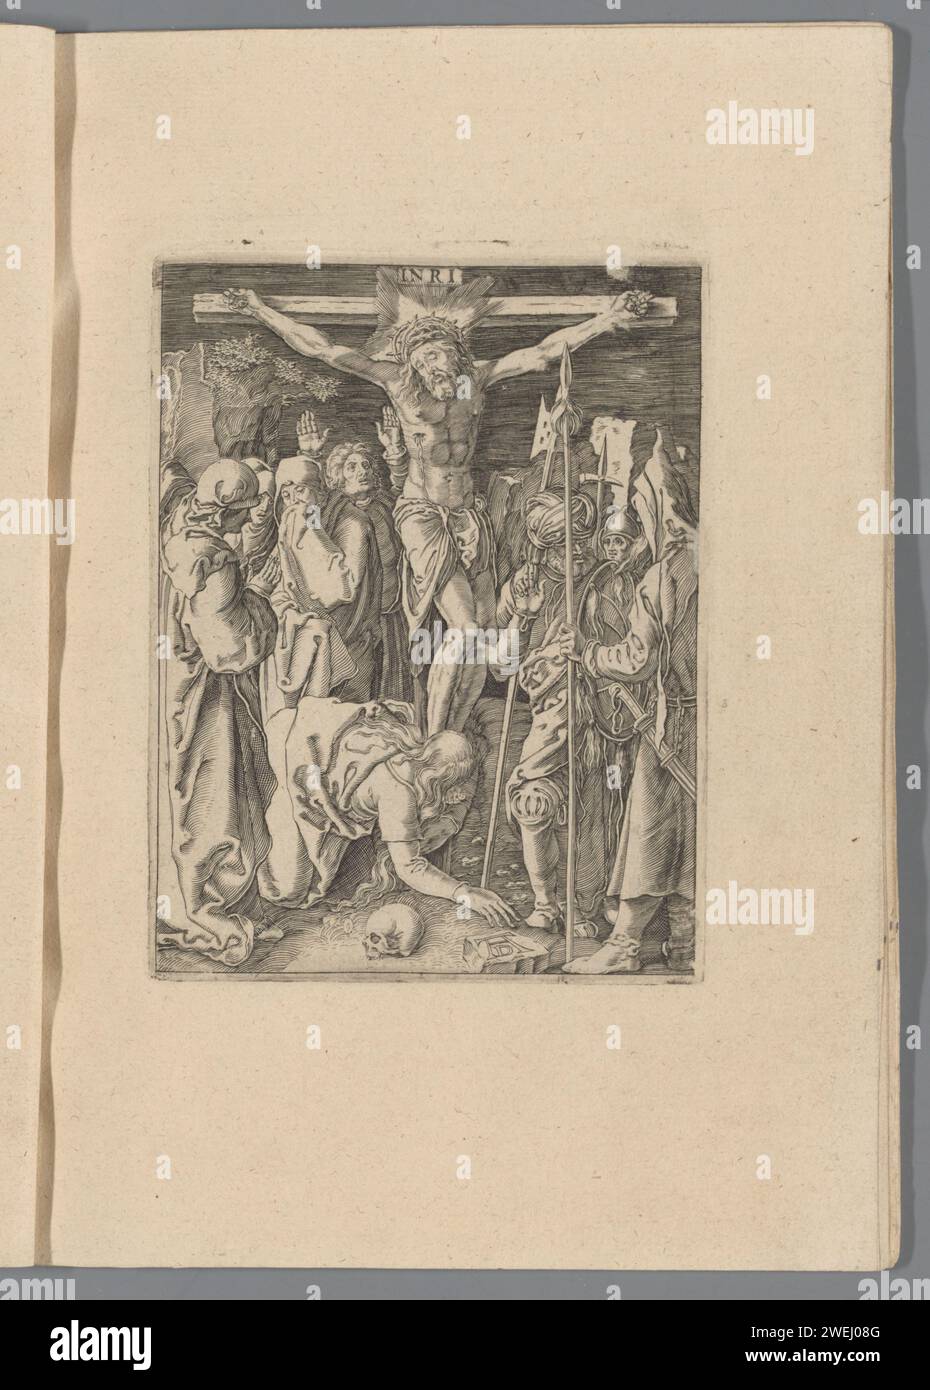 Crucifixion, 1610 - 1620 print Christ on the cross, the Mary's on his right side, a few soldiers on his left. Print is part of an album.  paper engraving crucified Christ, with particular persons under the cross Stock Photo